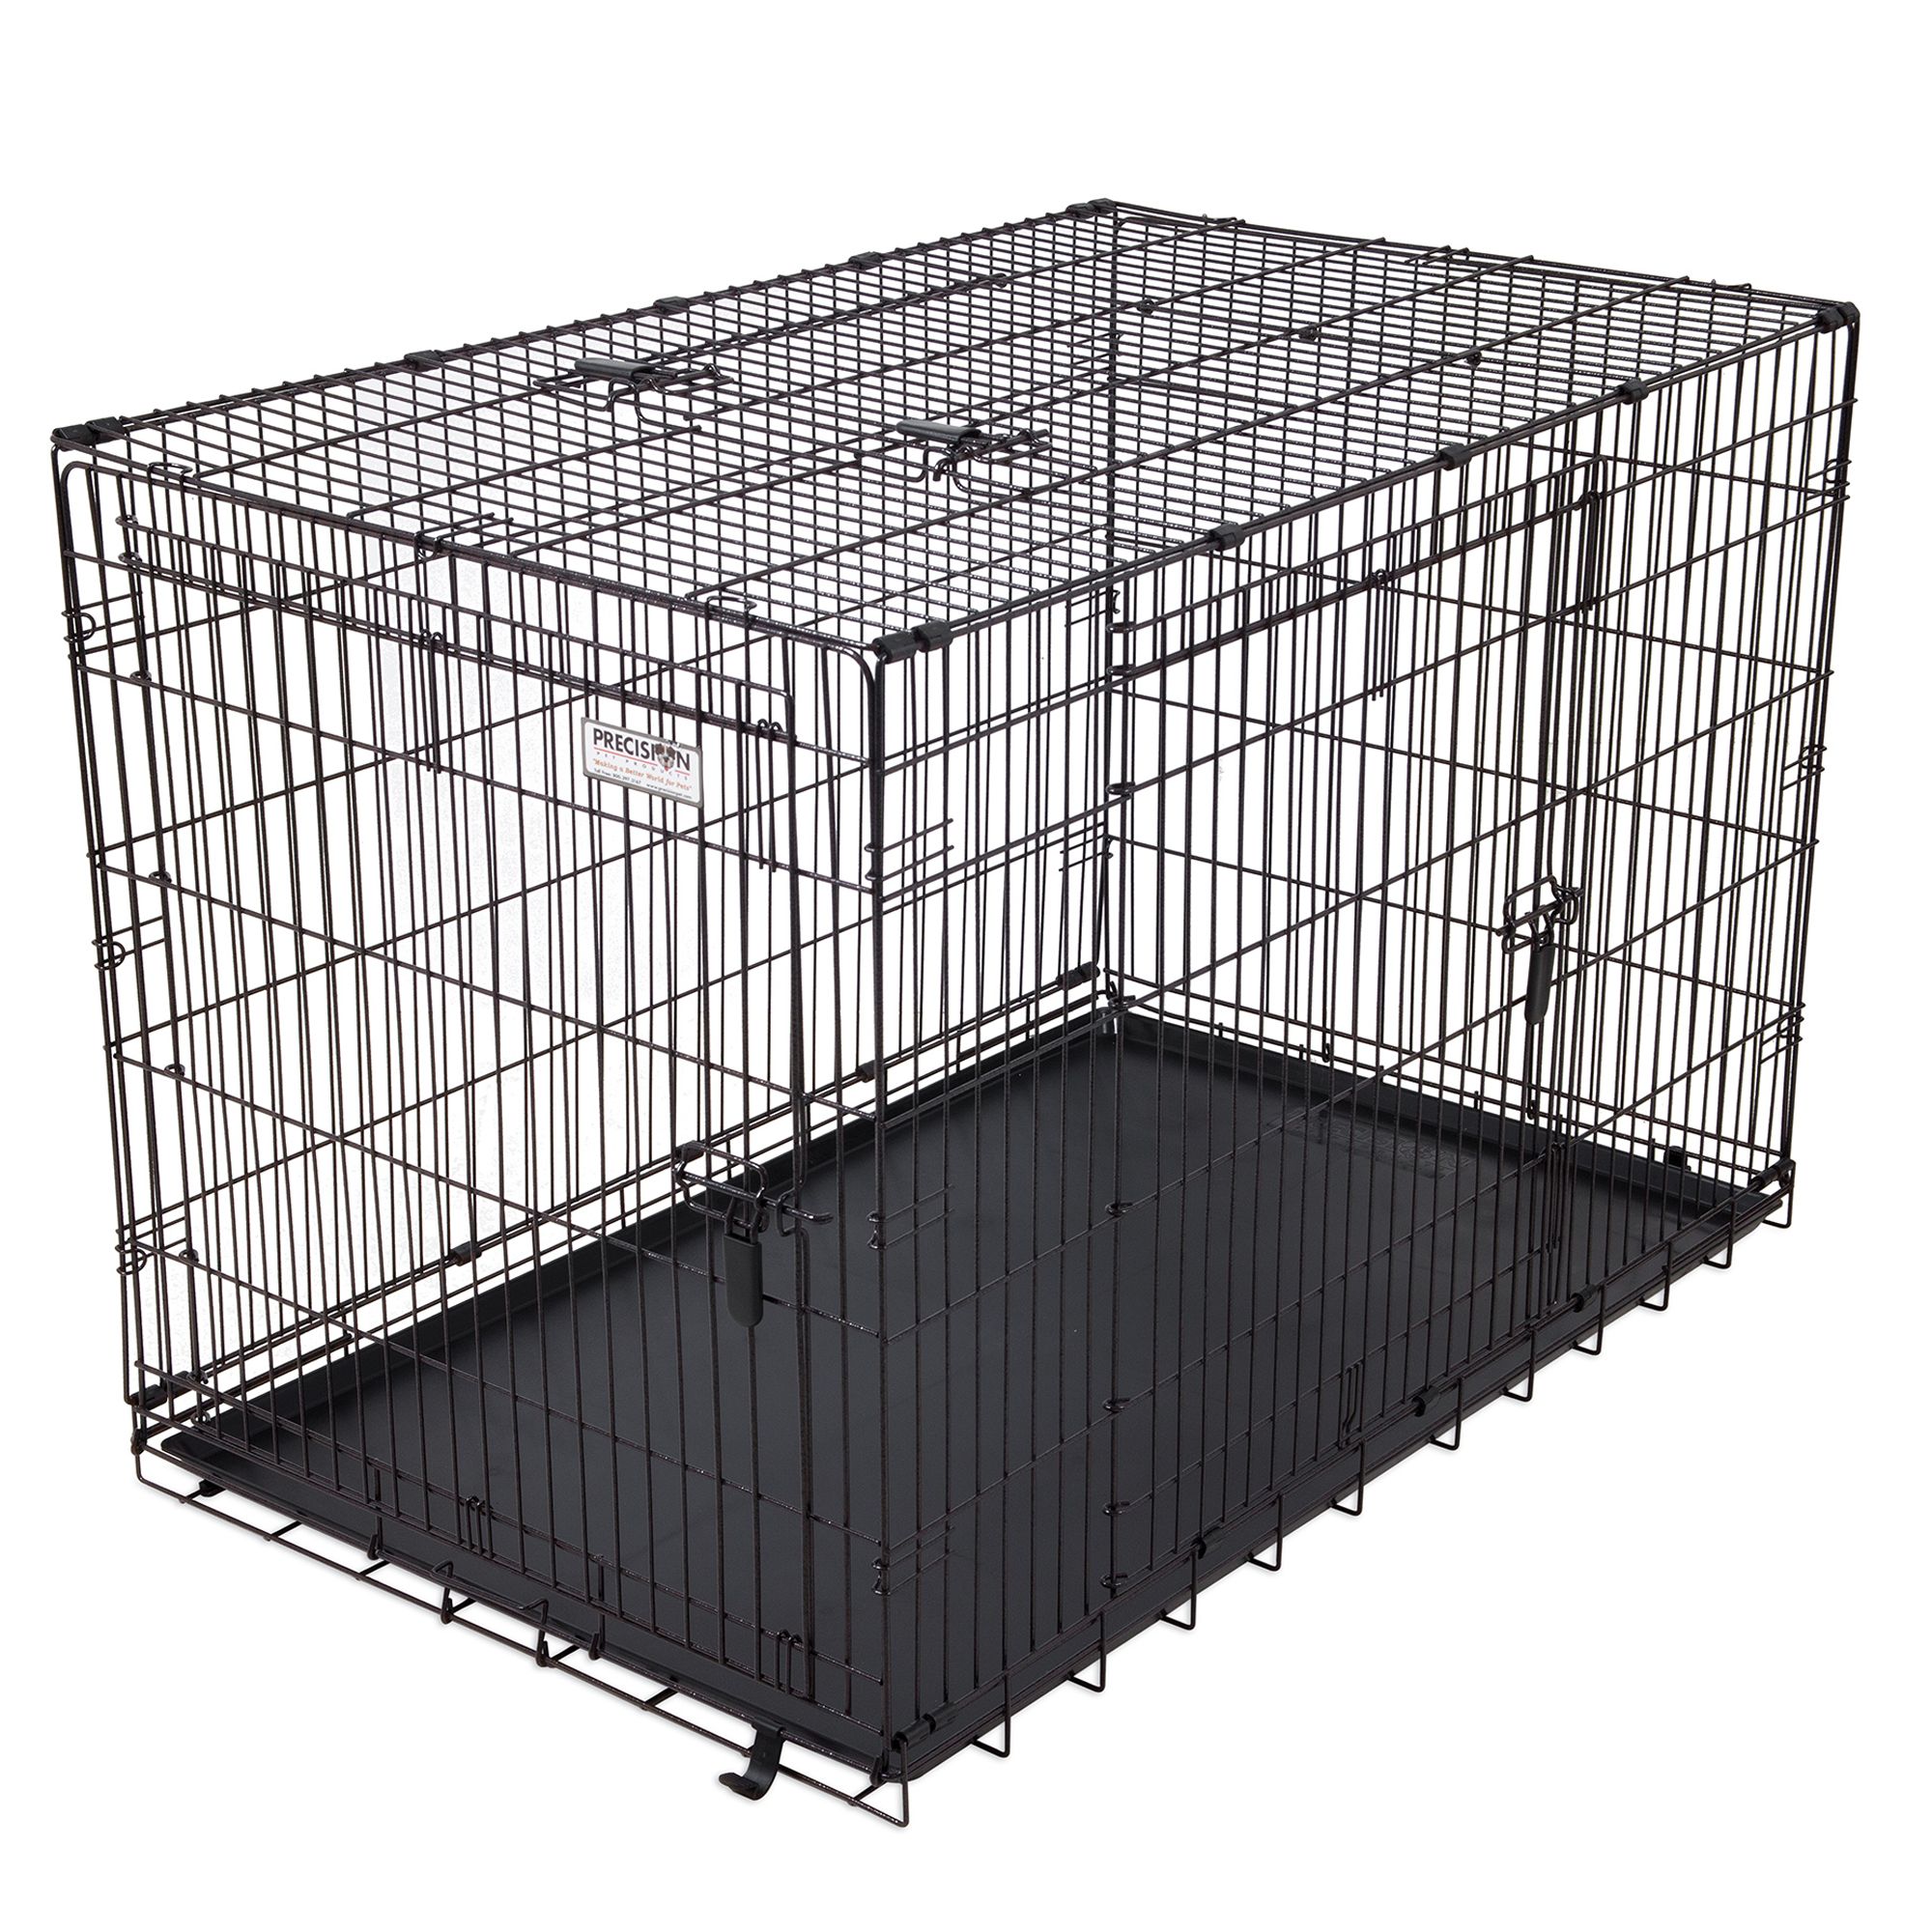 6 Sizes Precision Pet by Petmate ProValu Two Door Wire Dog Crate with Precision Lock System 